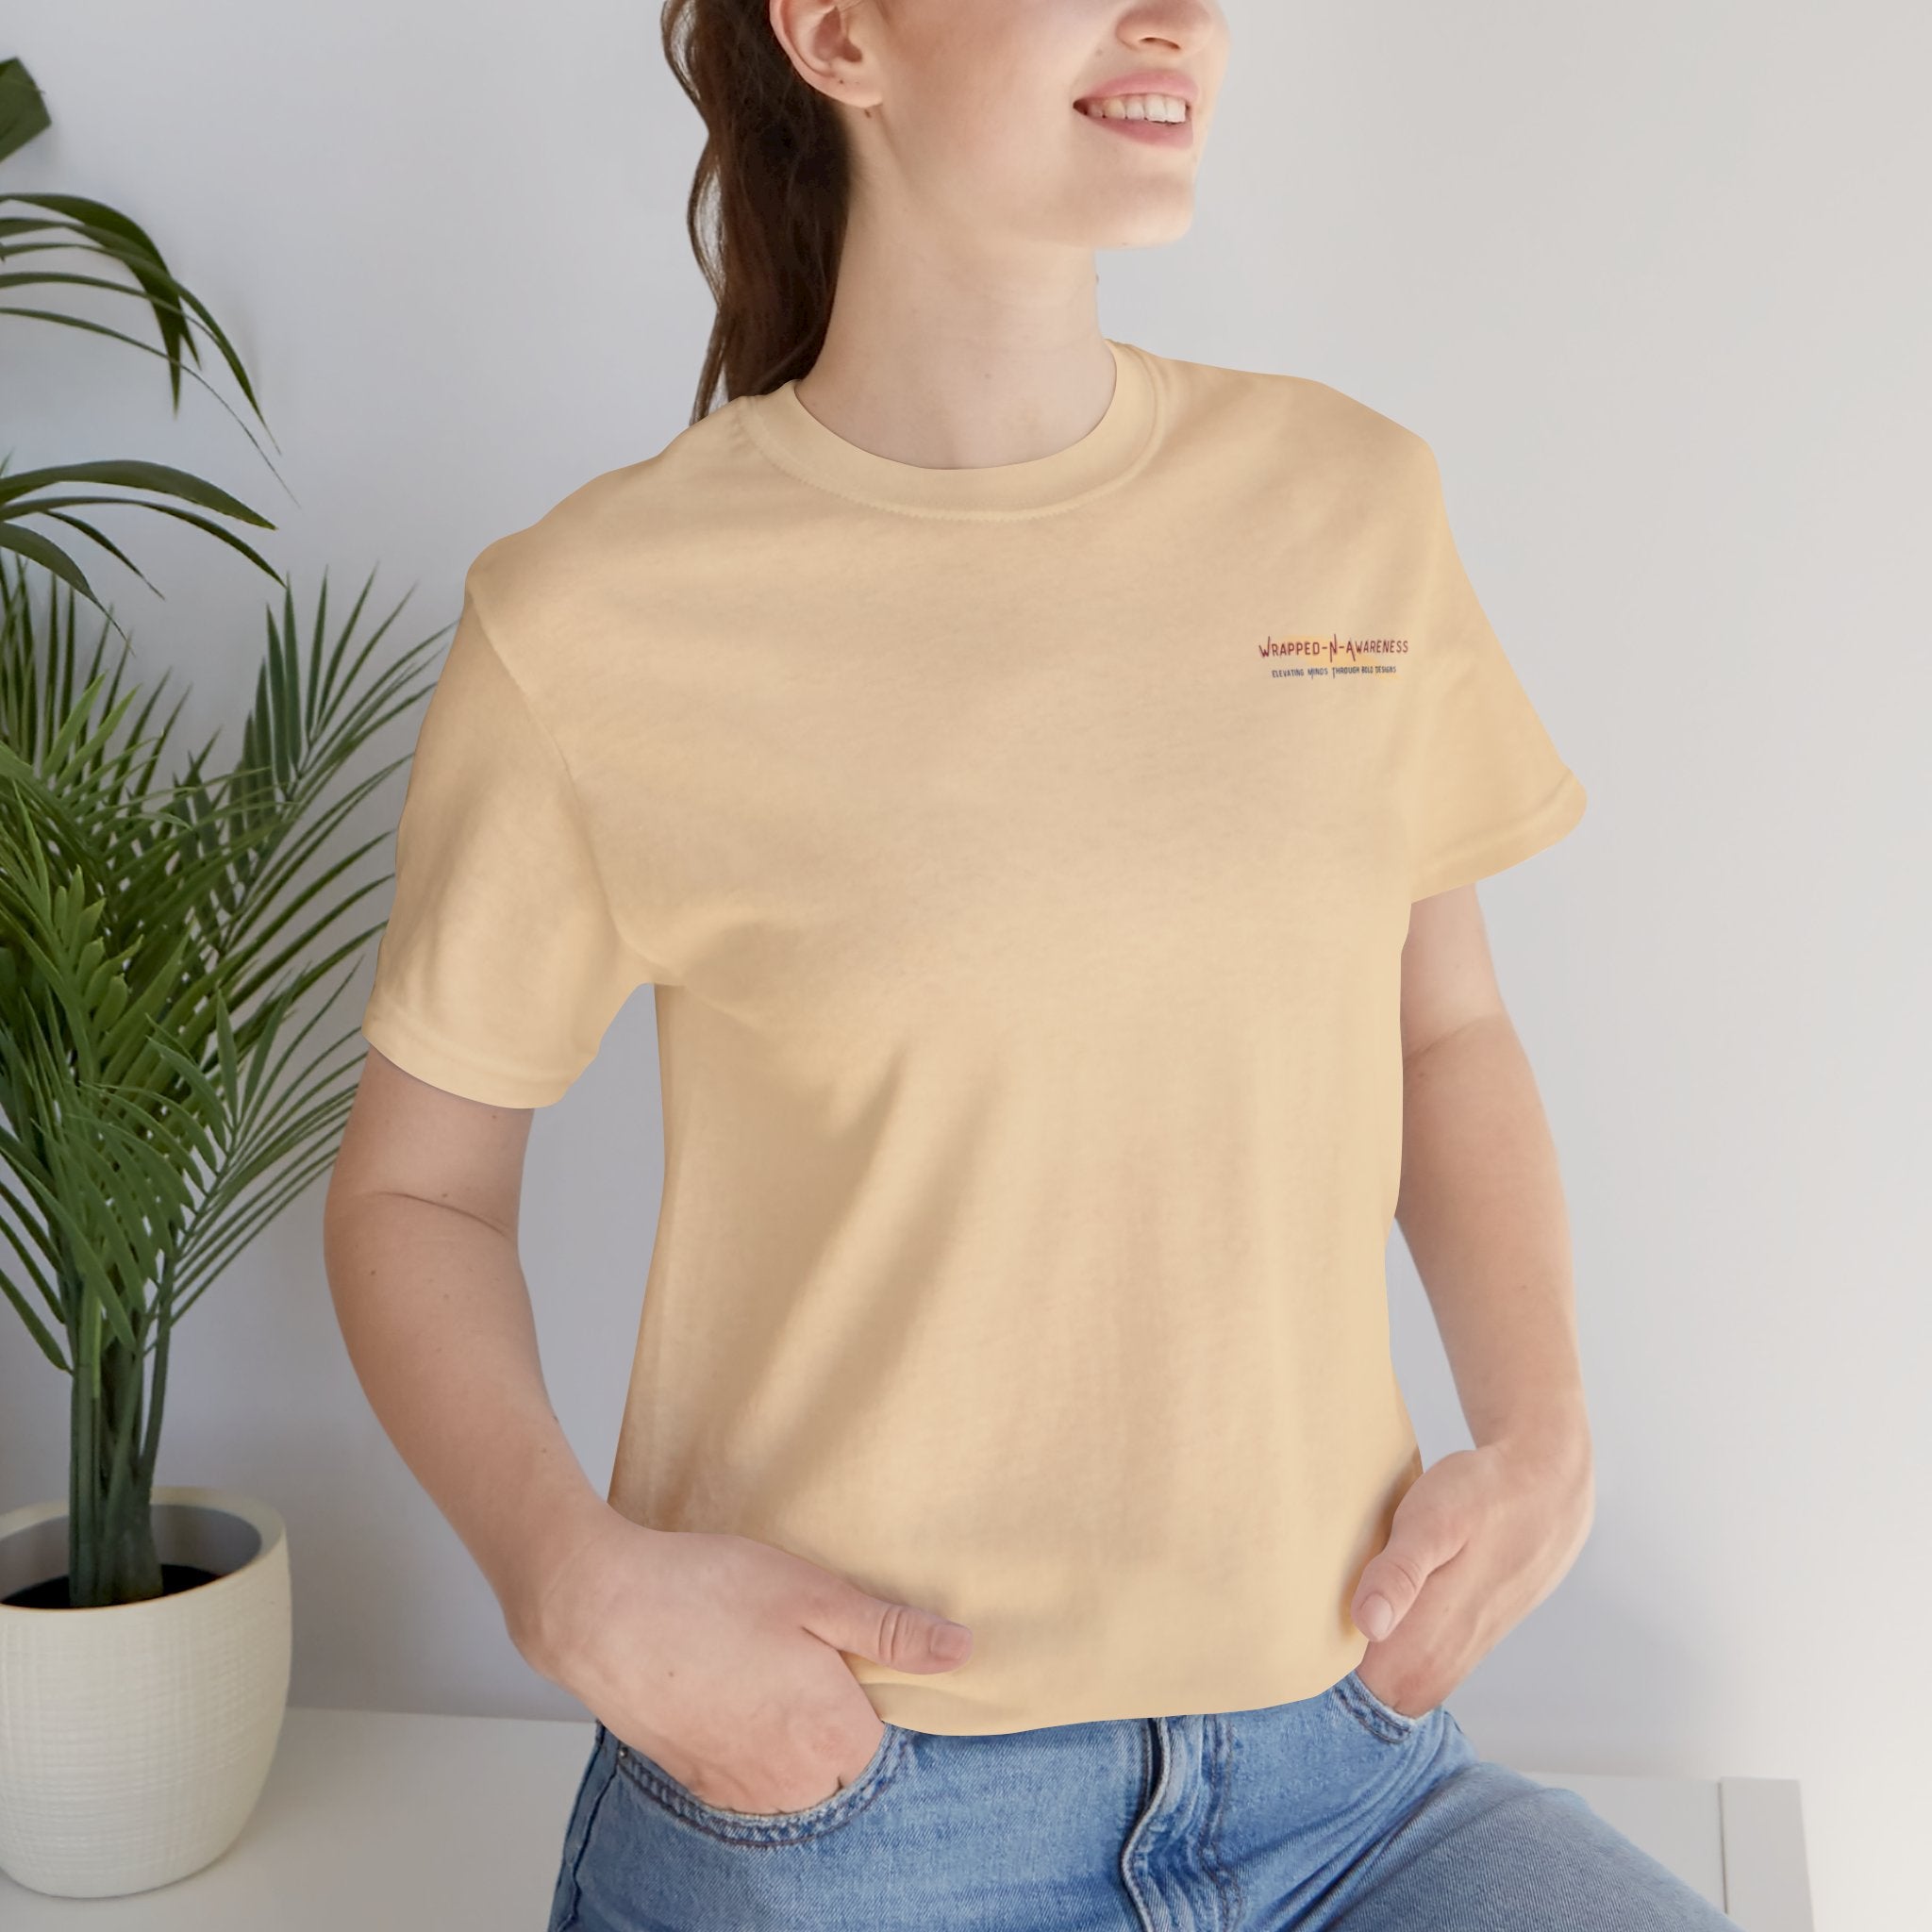 Inspire Growth Jersey Tee - Bella+Canvas 3001 Turquoise Airlume Cotton Bella+Canvas 3001 Crew Neckline Jersey Short Sleeve Lightweight Fabric Mental Health Support Retail Fit Tear-away Label Tee Unisex Tee T-Shirt 5431459997576344620_2048 Printify